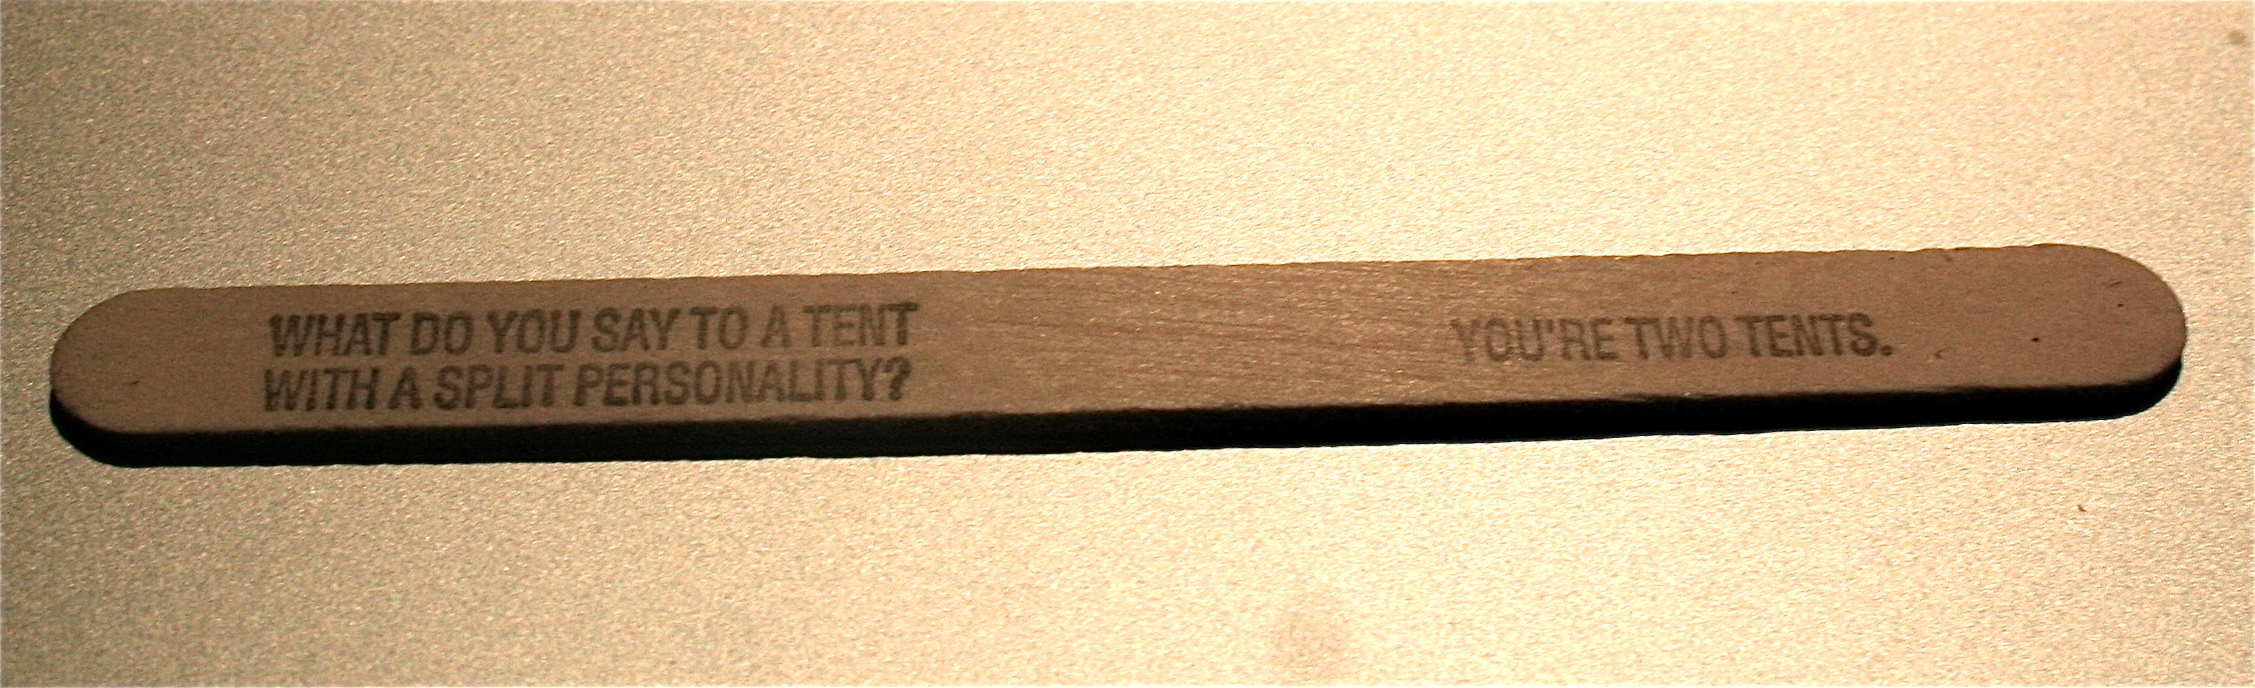 popsicle stick funny - What Do You Say To A Tent With A Split Personality? You'Re Two Tents.